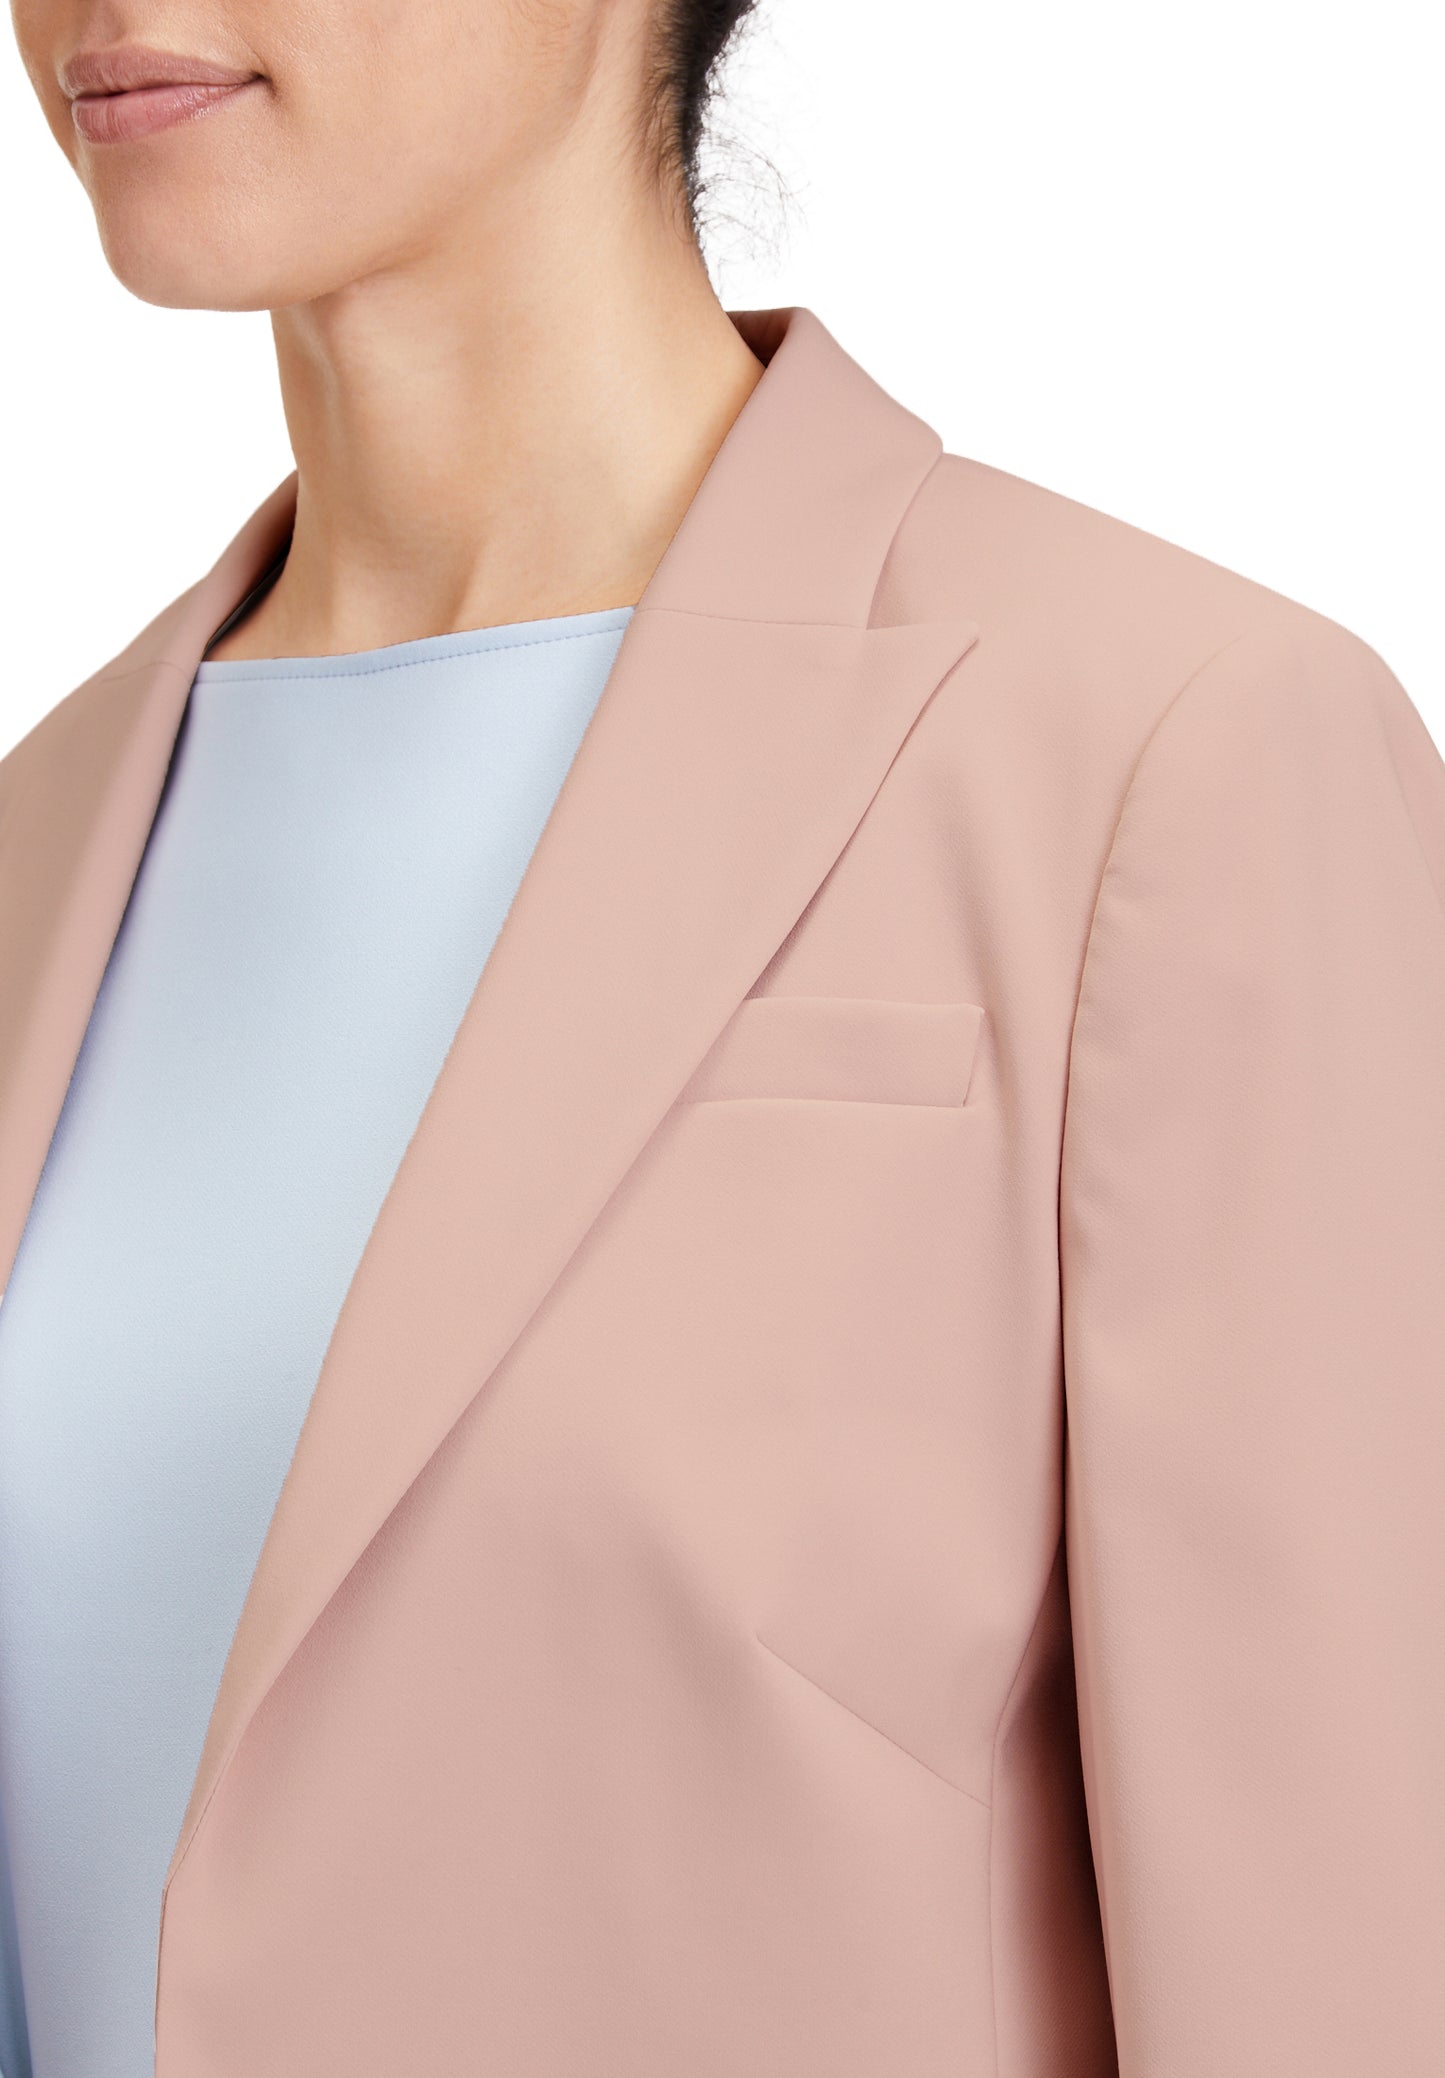 Betty Barclay Pale Pink Cropped Jacket 4350/1080